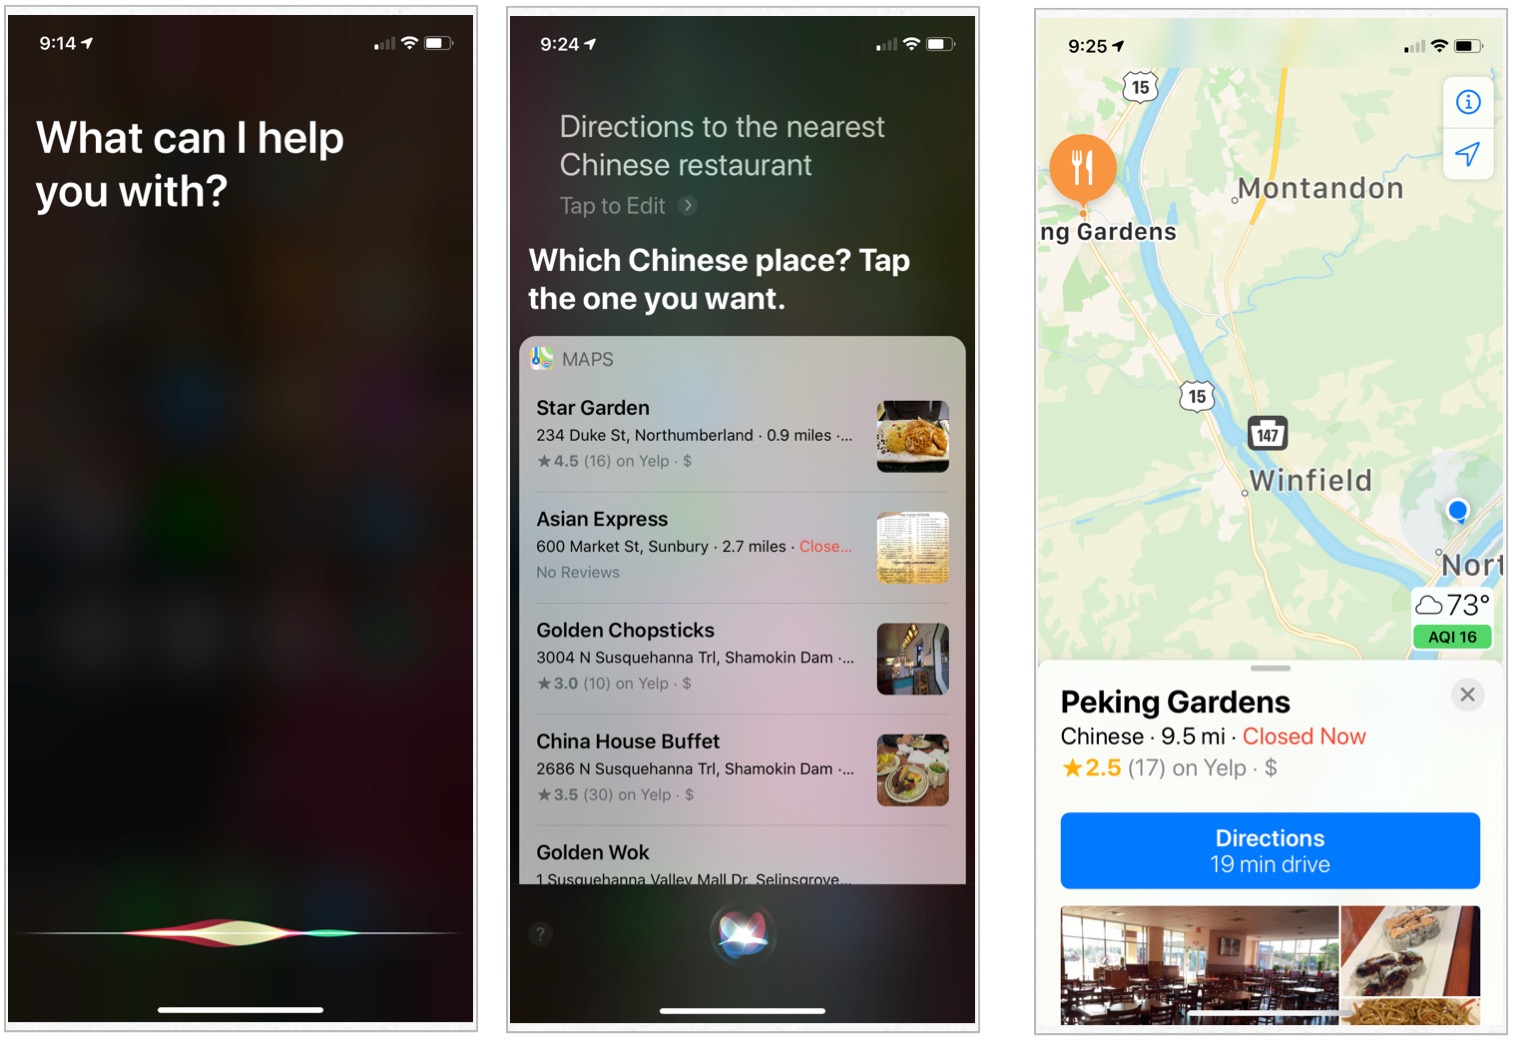 To find local businesses, Launch Siri by saying Hey Siri, then ask for directions. Tap on the option.